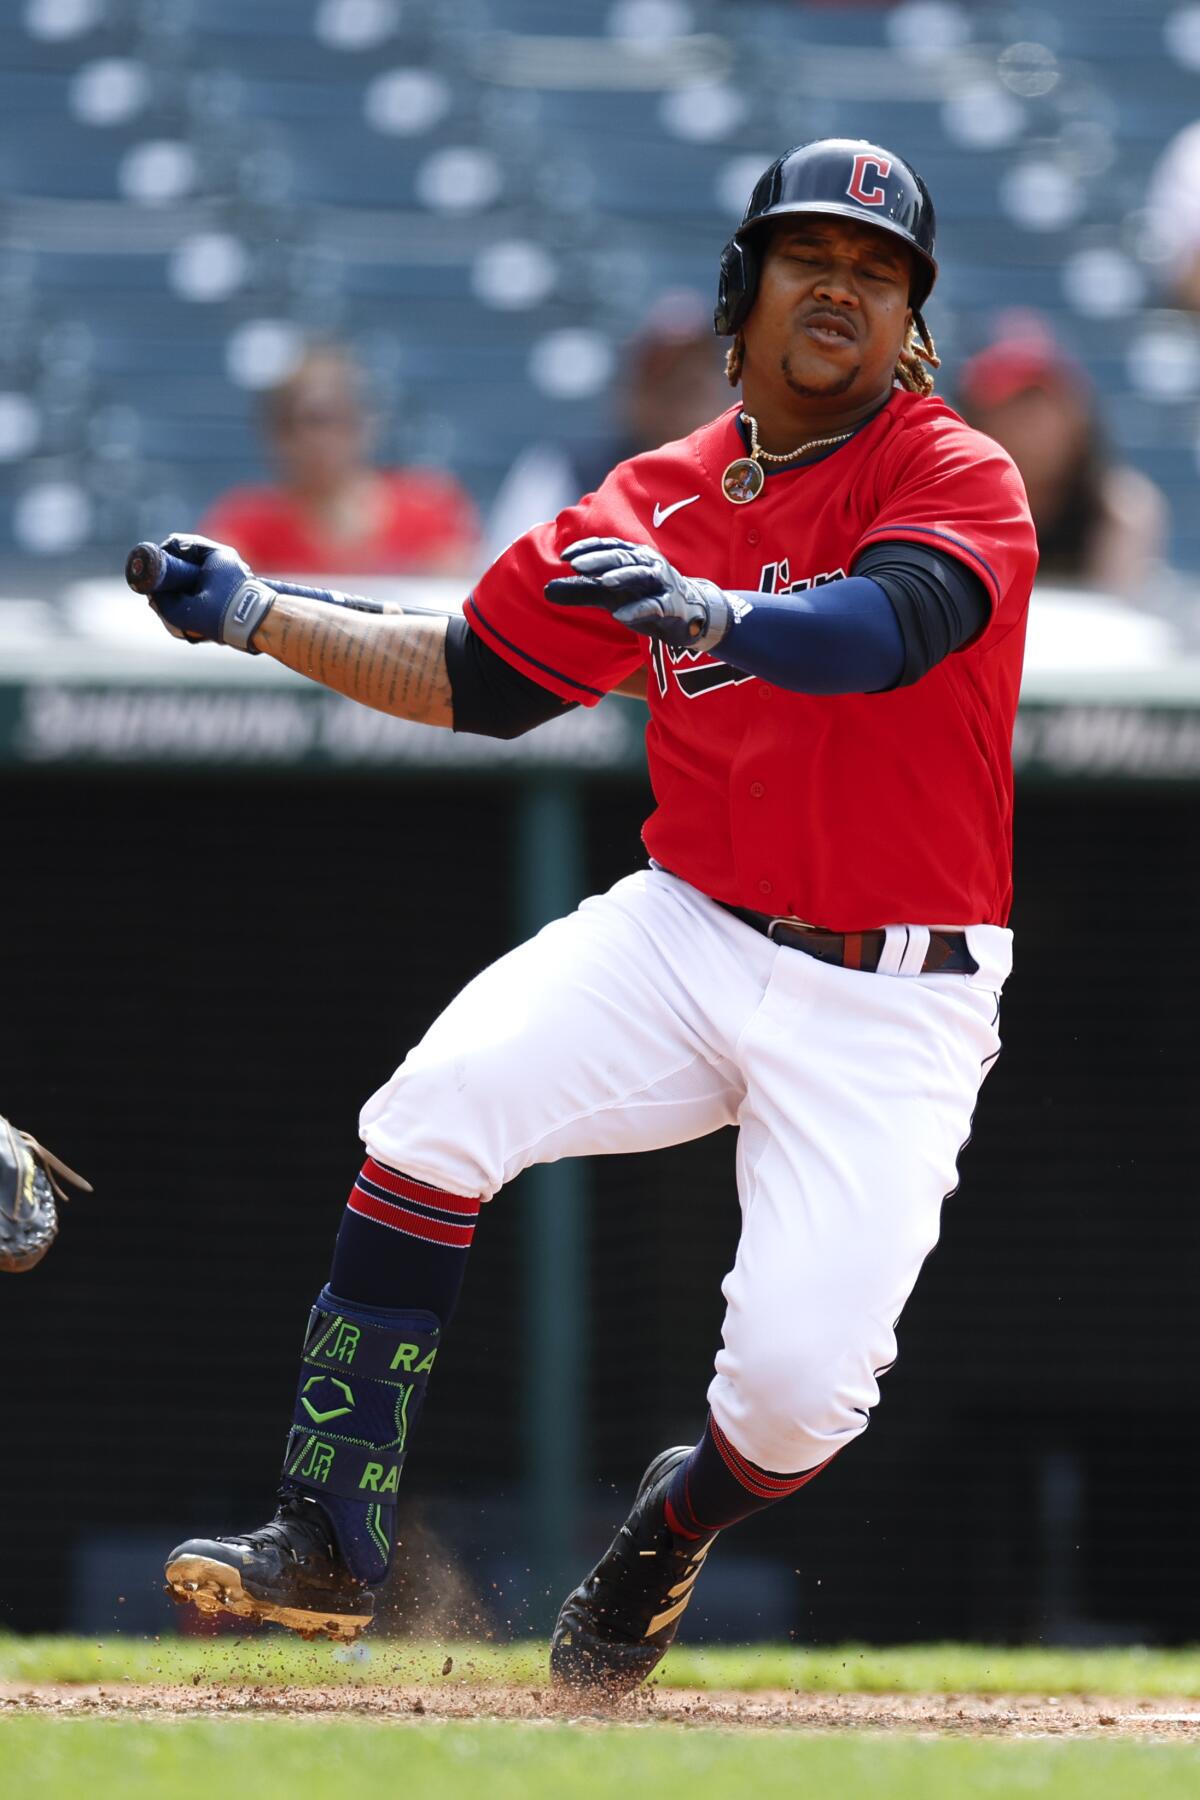 Cleveland Guardians' José Ramírez reacts after fouling a ball off his leg during the eighth inning of a baseball game against the Cincinnati Reds, Thursday, May 19, 2022, in Cleveland. (AP Photo/Ron Schwane)